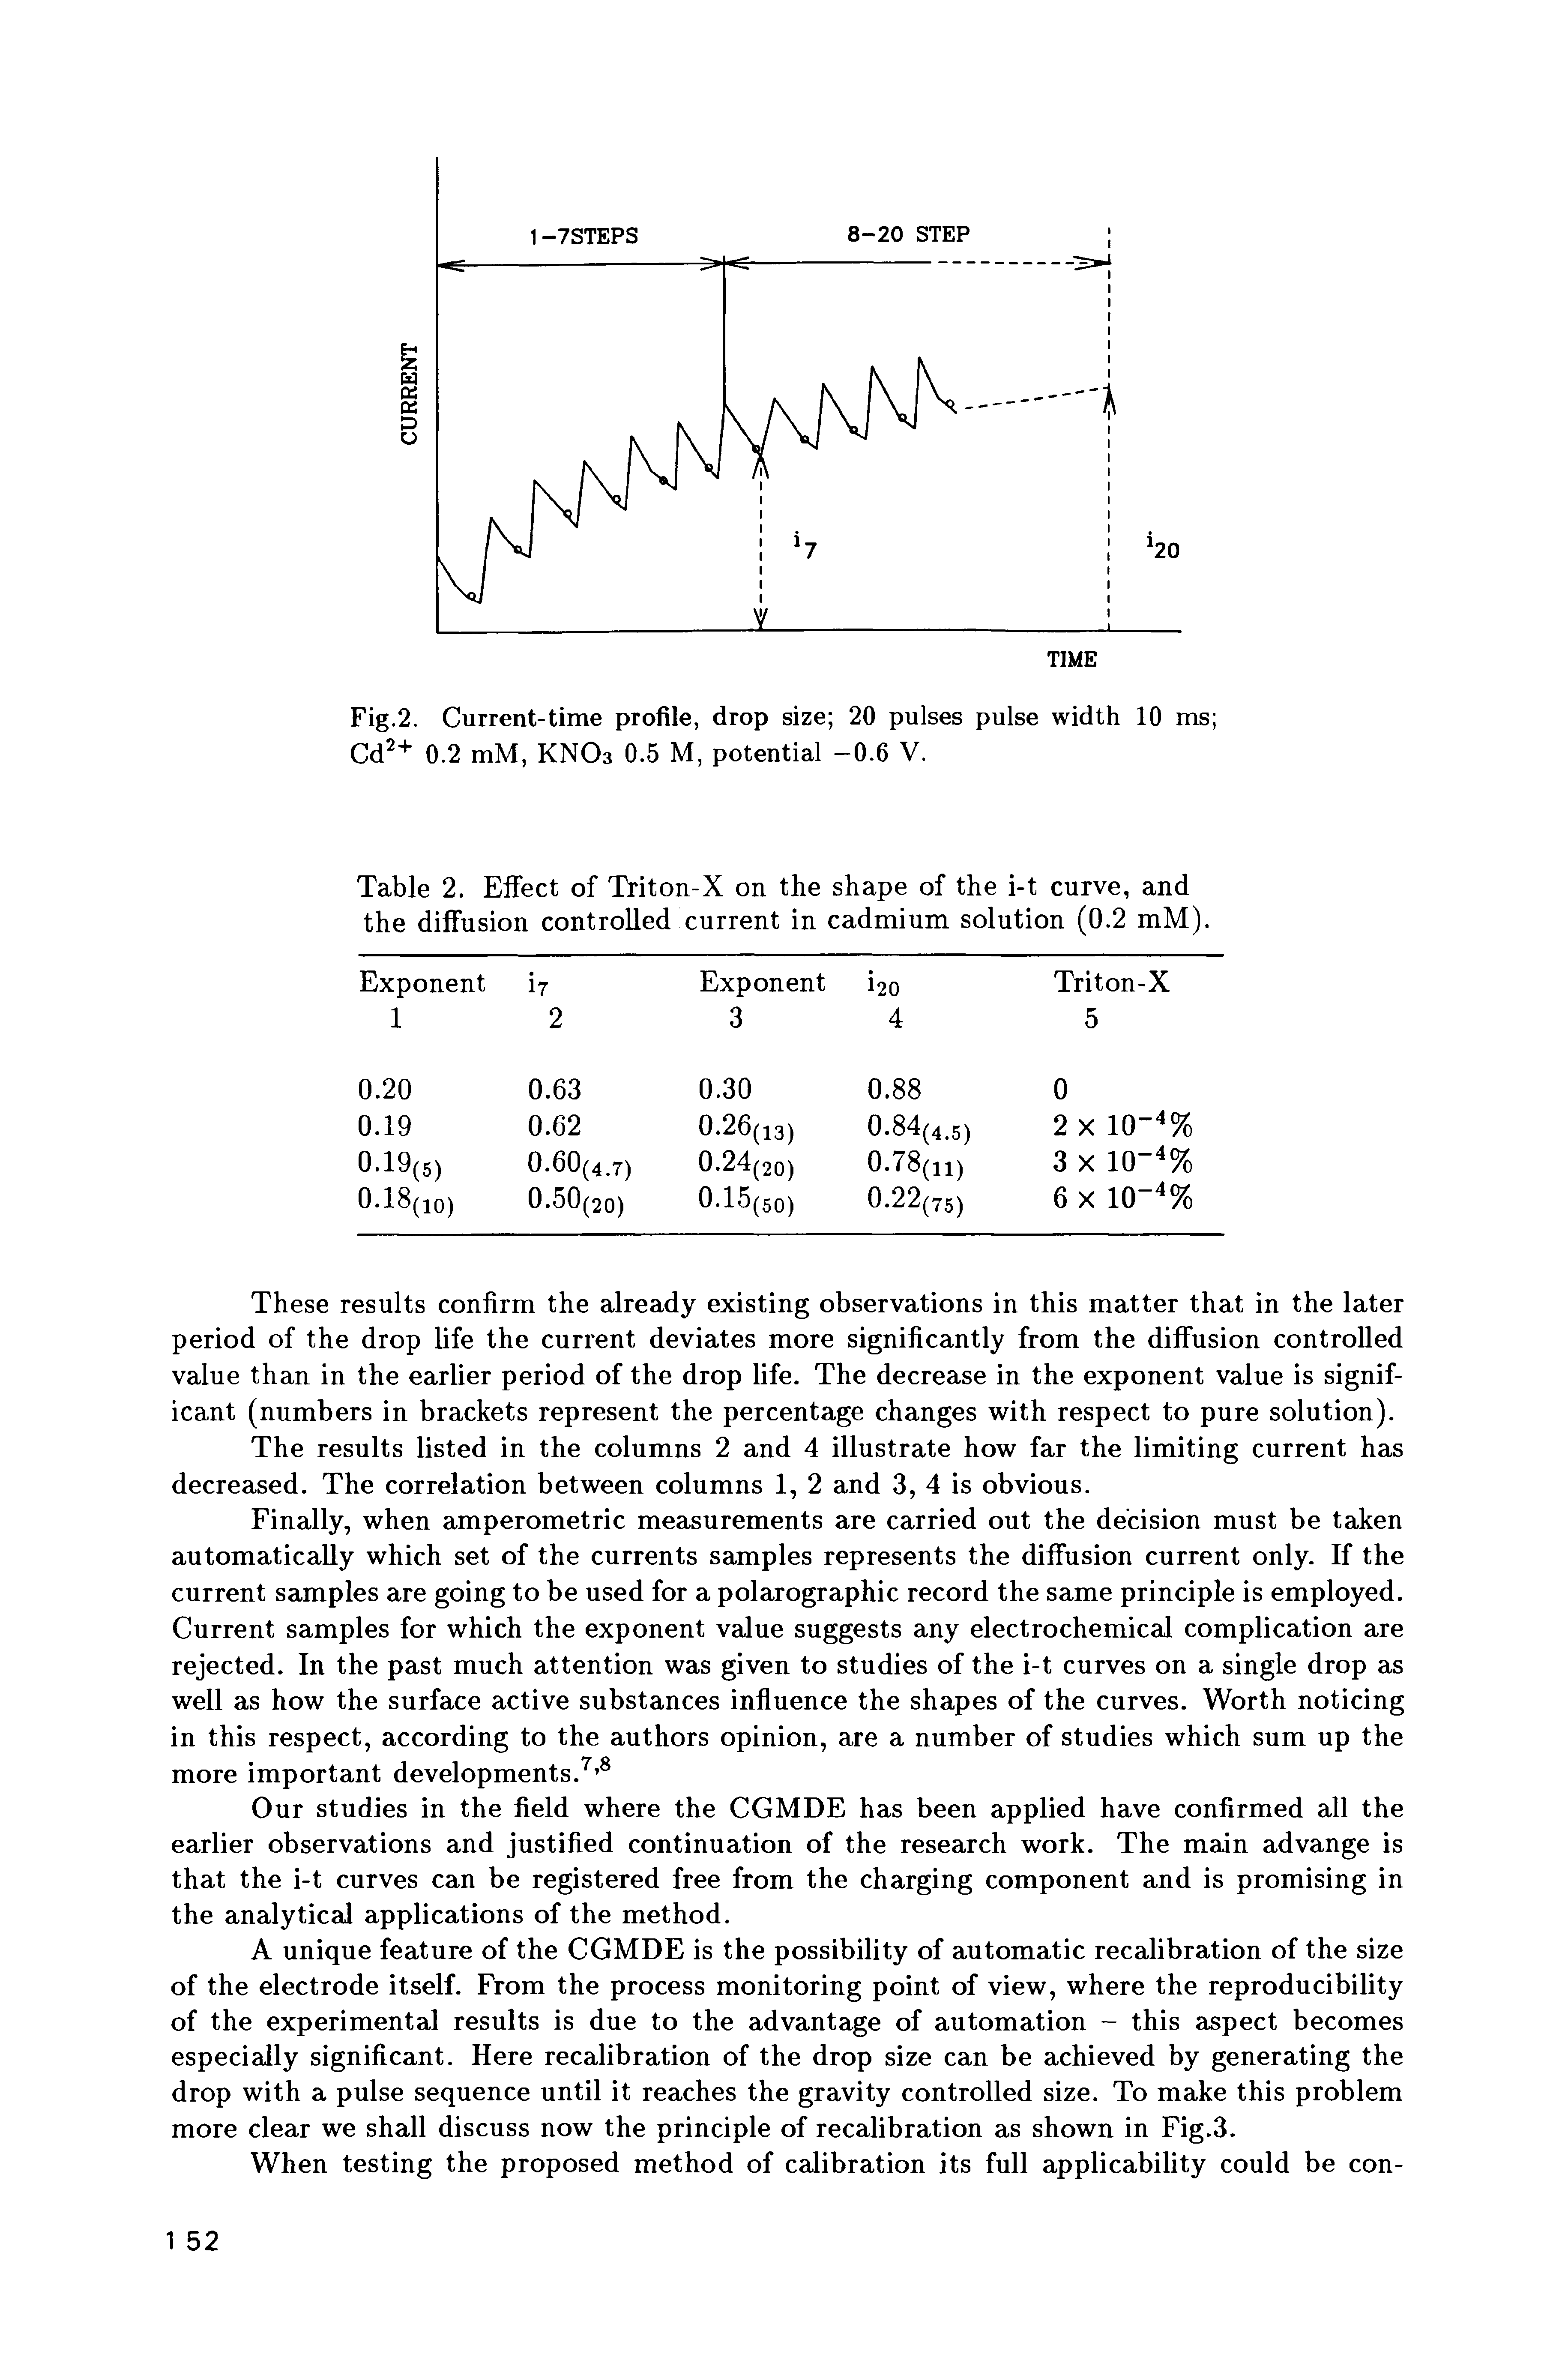 Table 2. Effect of Triton-X on the shape of the i-t curve, and the diffusion controlled current in cadmium solution (0.2 mM).